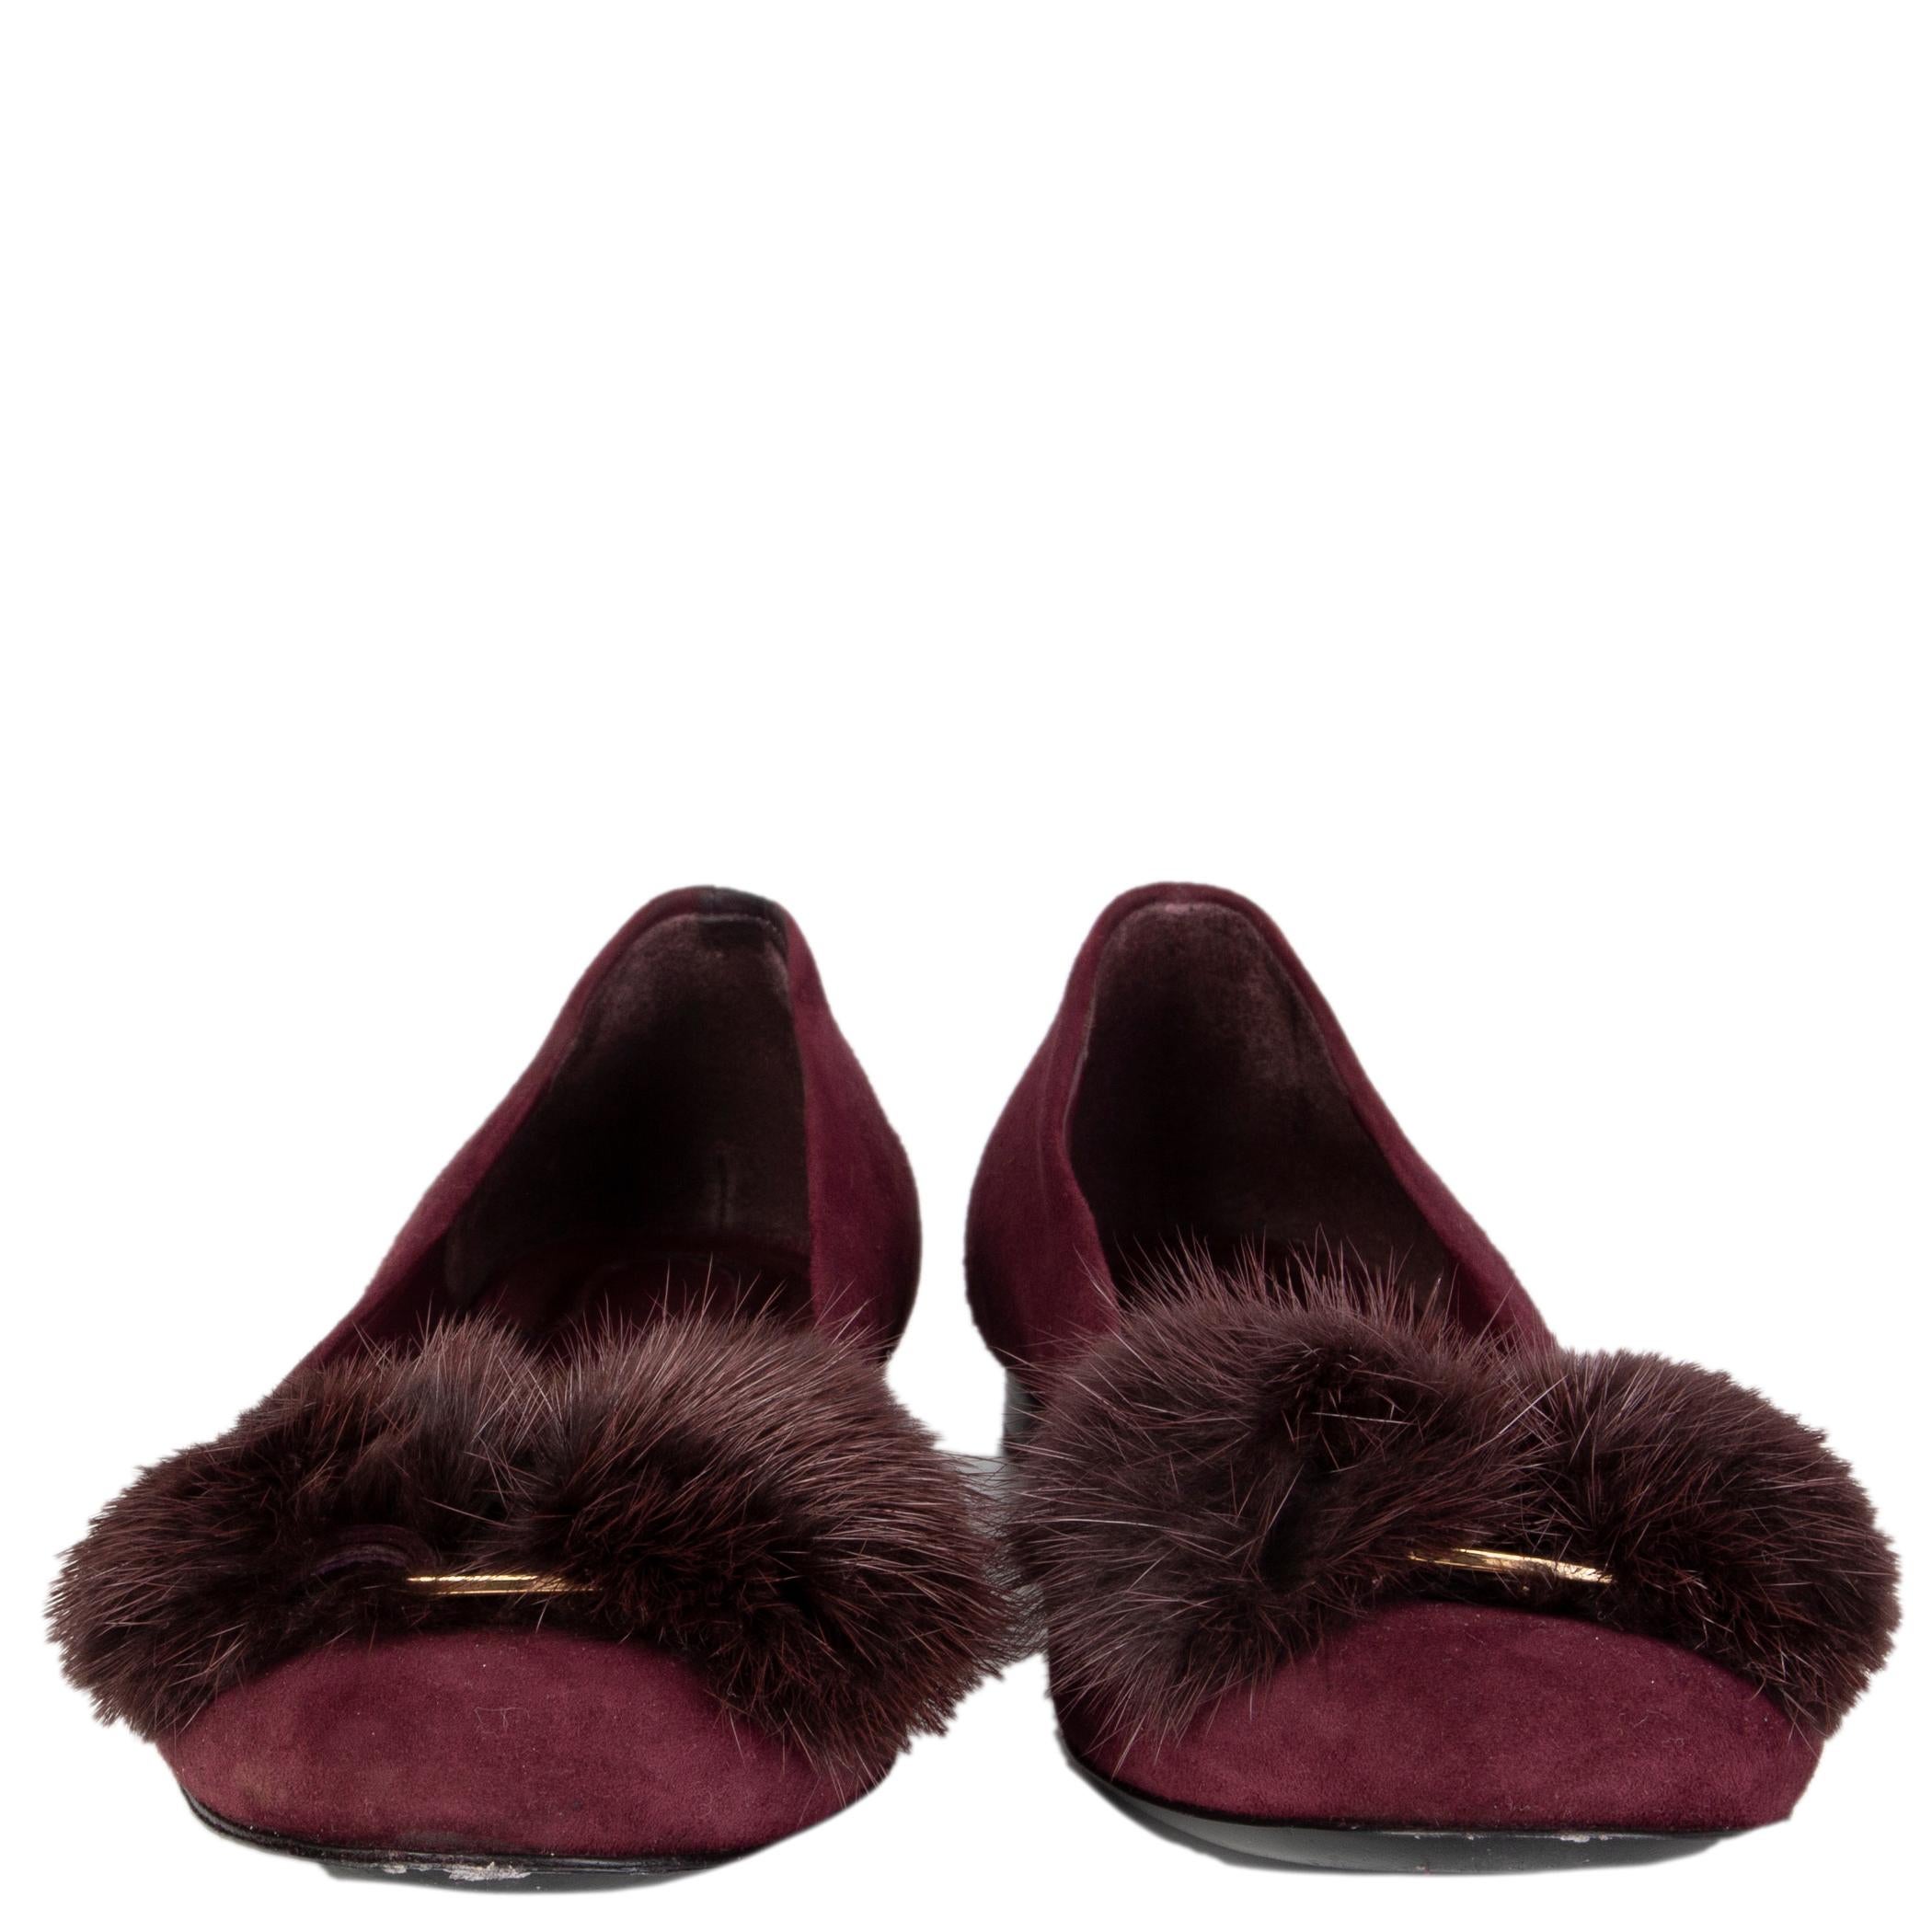 100% authentic Salvatore Ferragamo 'Varina' ballet flats in burgundy suede with mink bow detail. Have been worn and are in excellent condition. Come with dust bag. 

Measurements
Imprinted Size	7C
Shoe Size	37
Inside Sole	24cm (9.4in)
Width	7.5cm